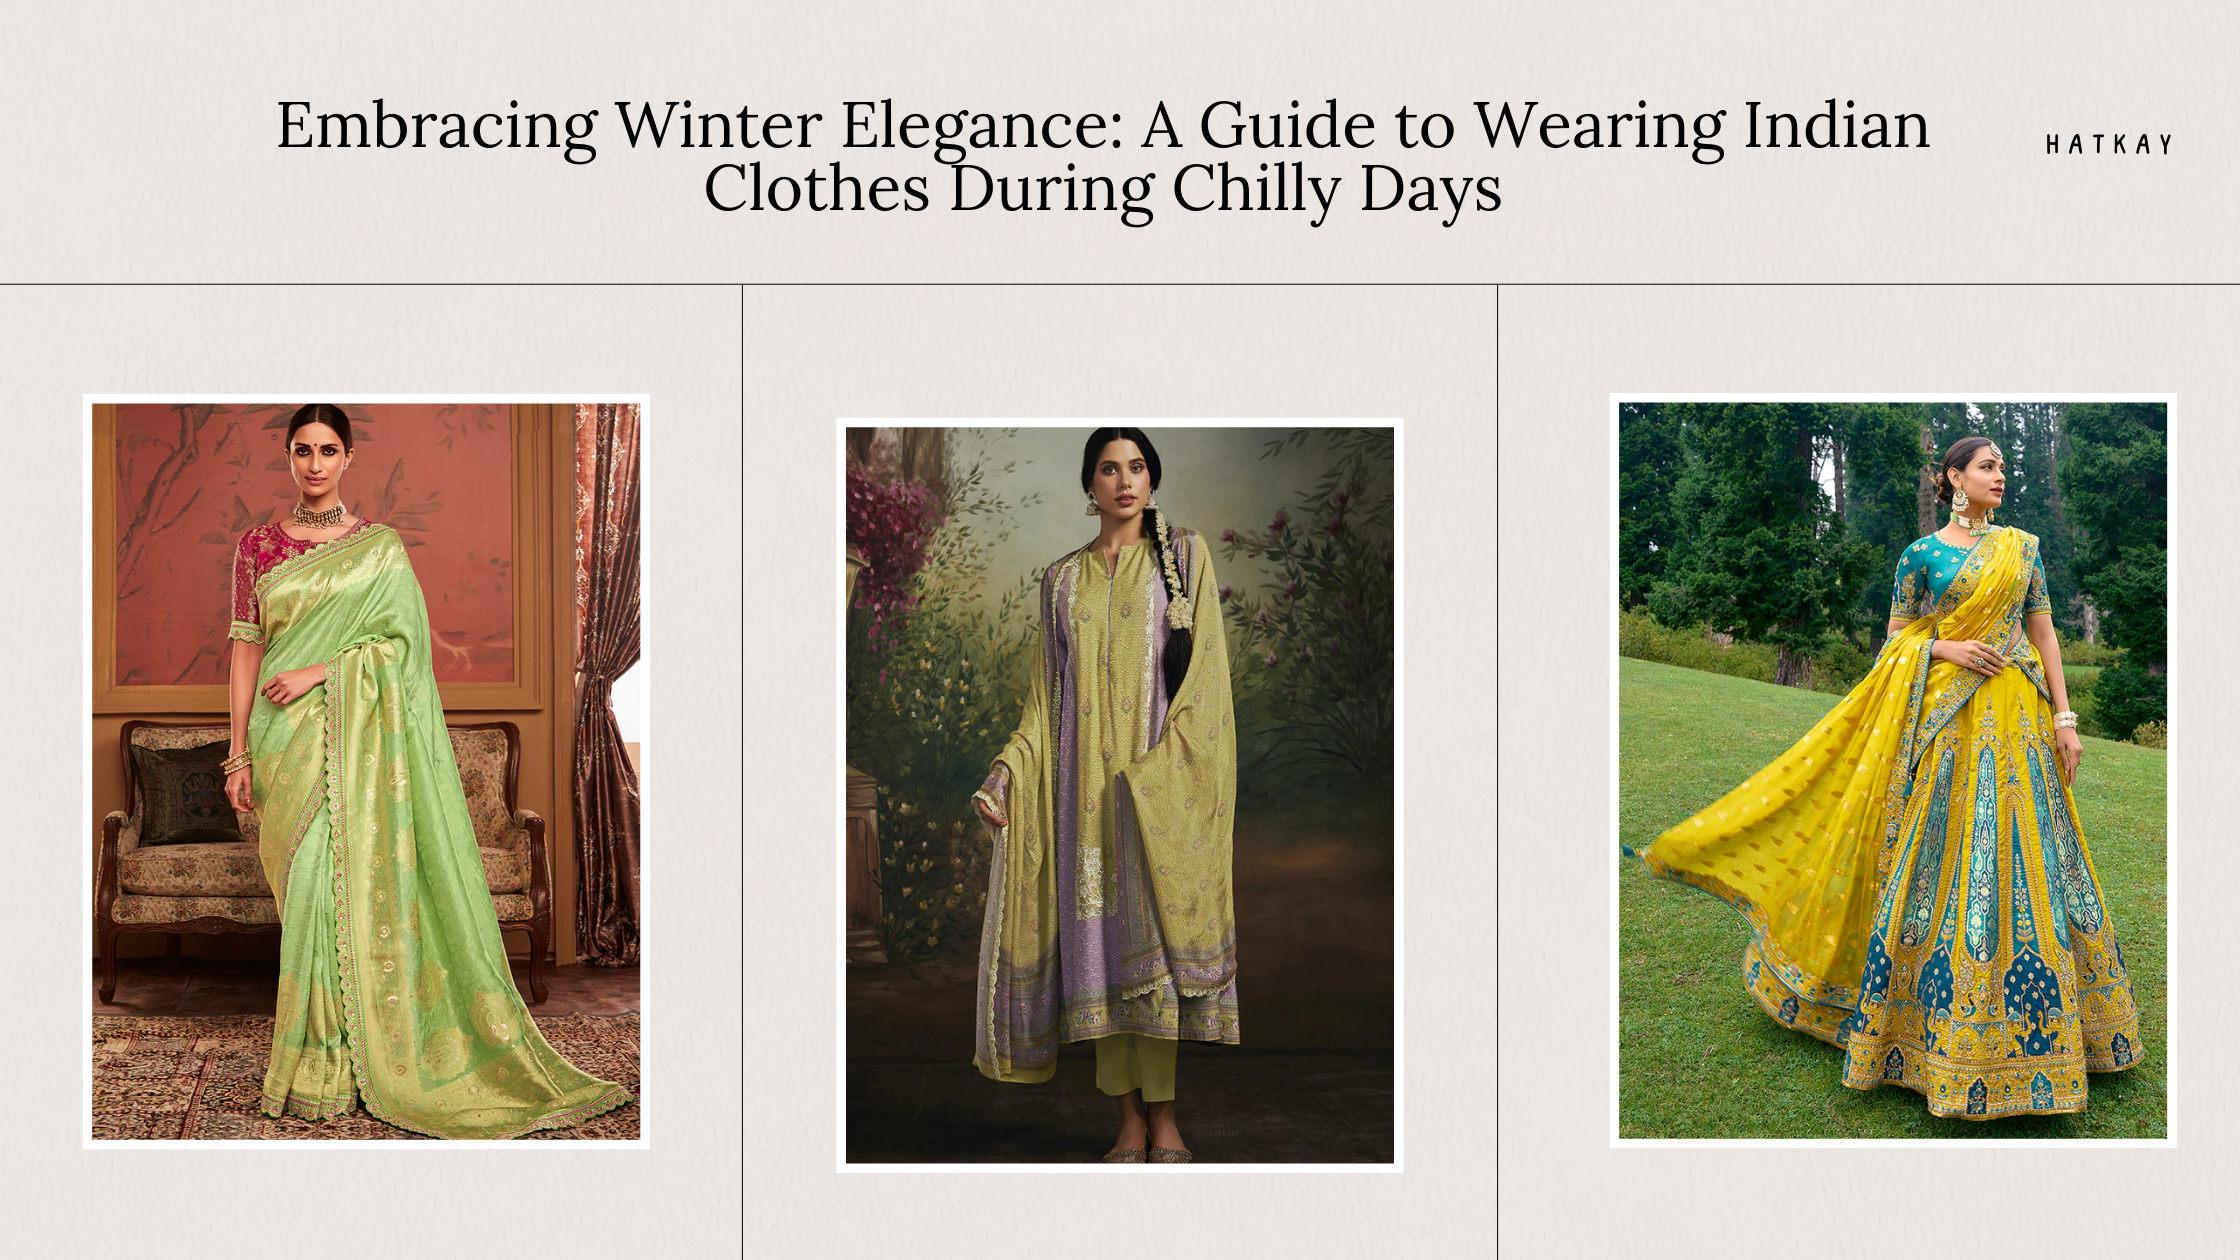 Embracing Winter Elegance: A Guide to Wearing Indian Clothes During Chilly Days